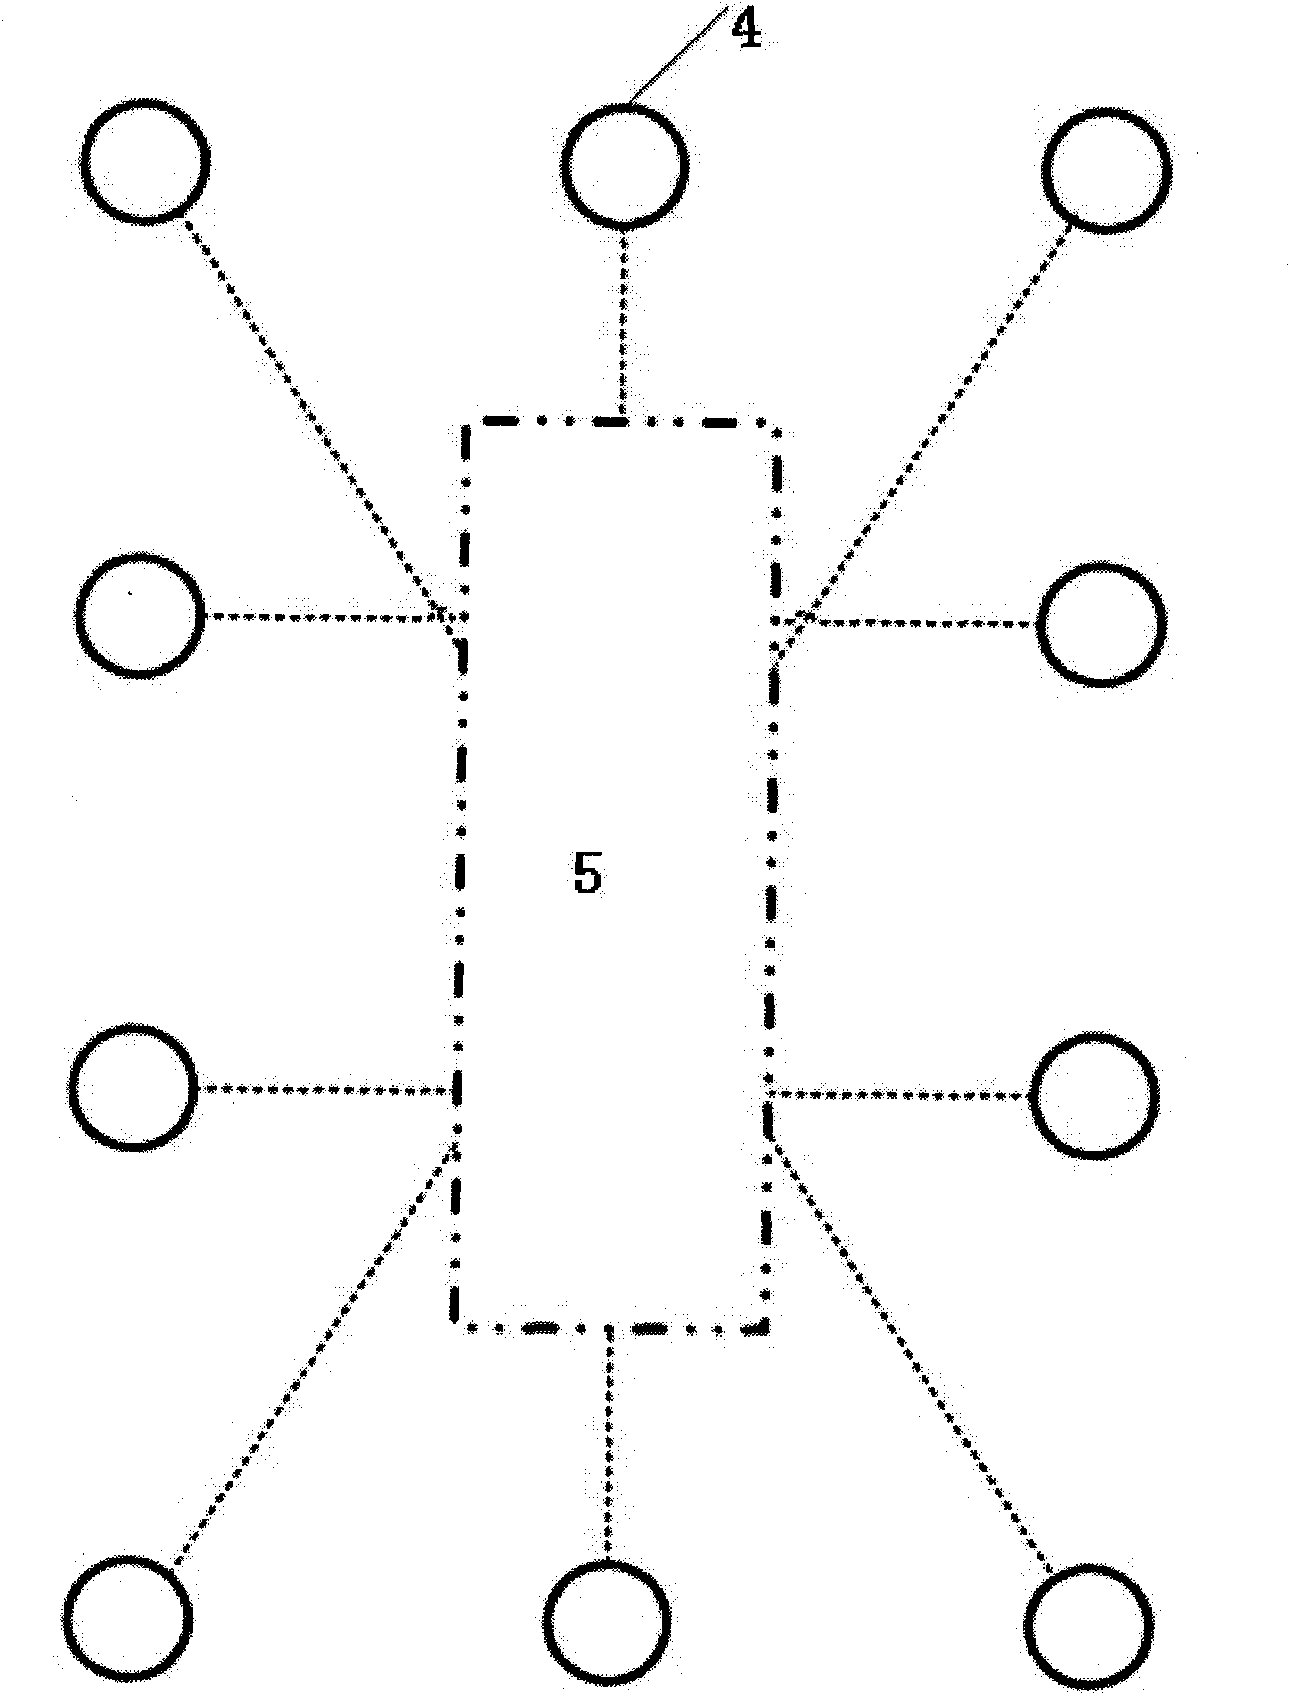 360-degree dead-angle-free obstacle intelligent detection and early warning method for vehicle